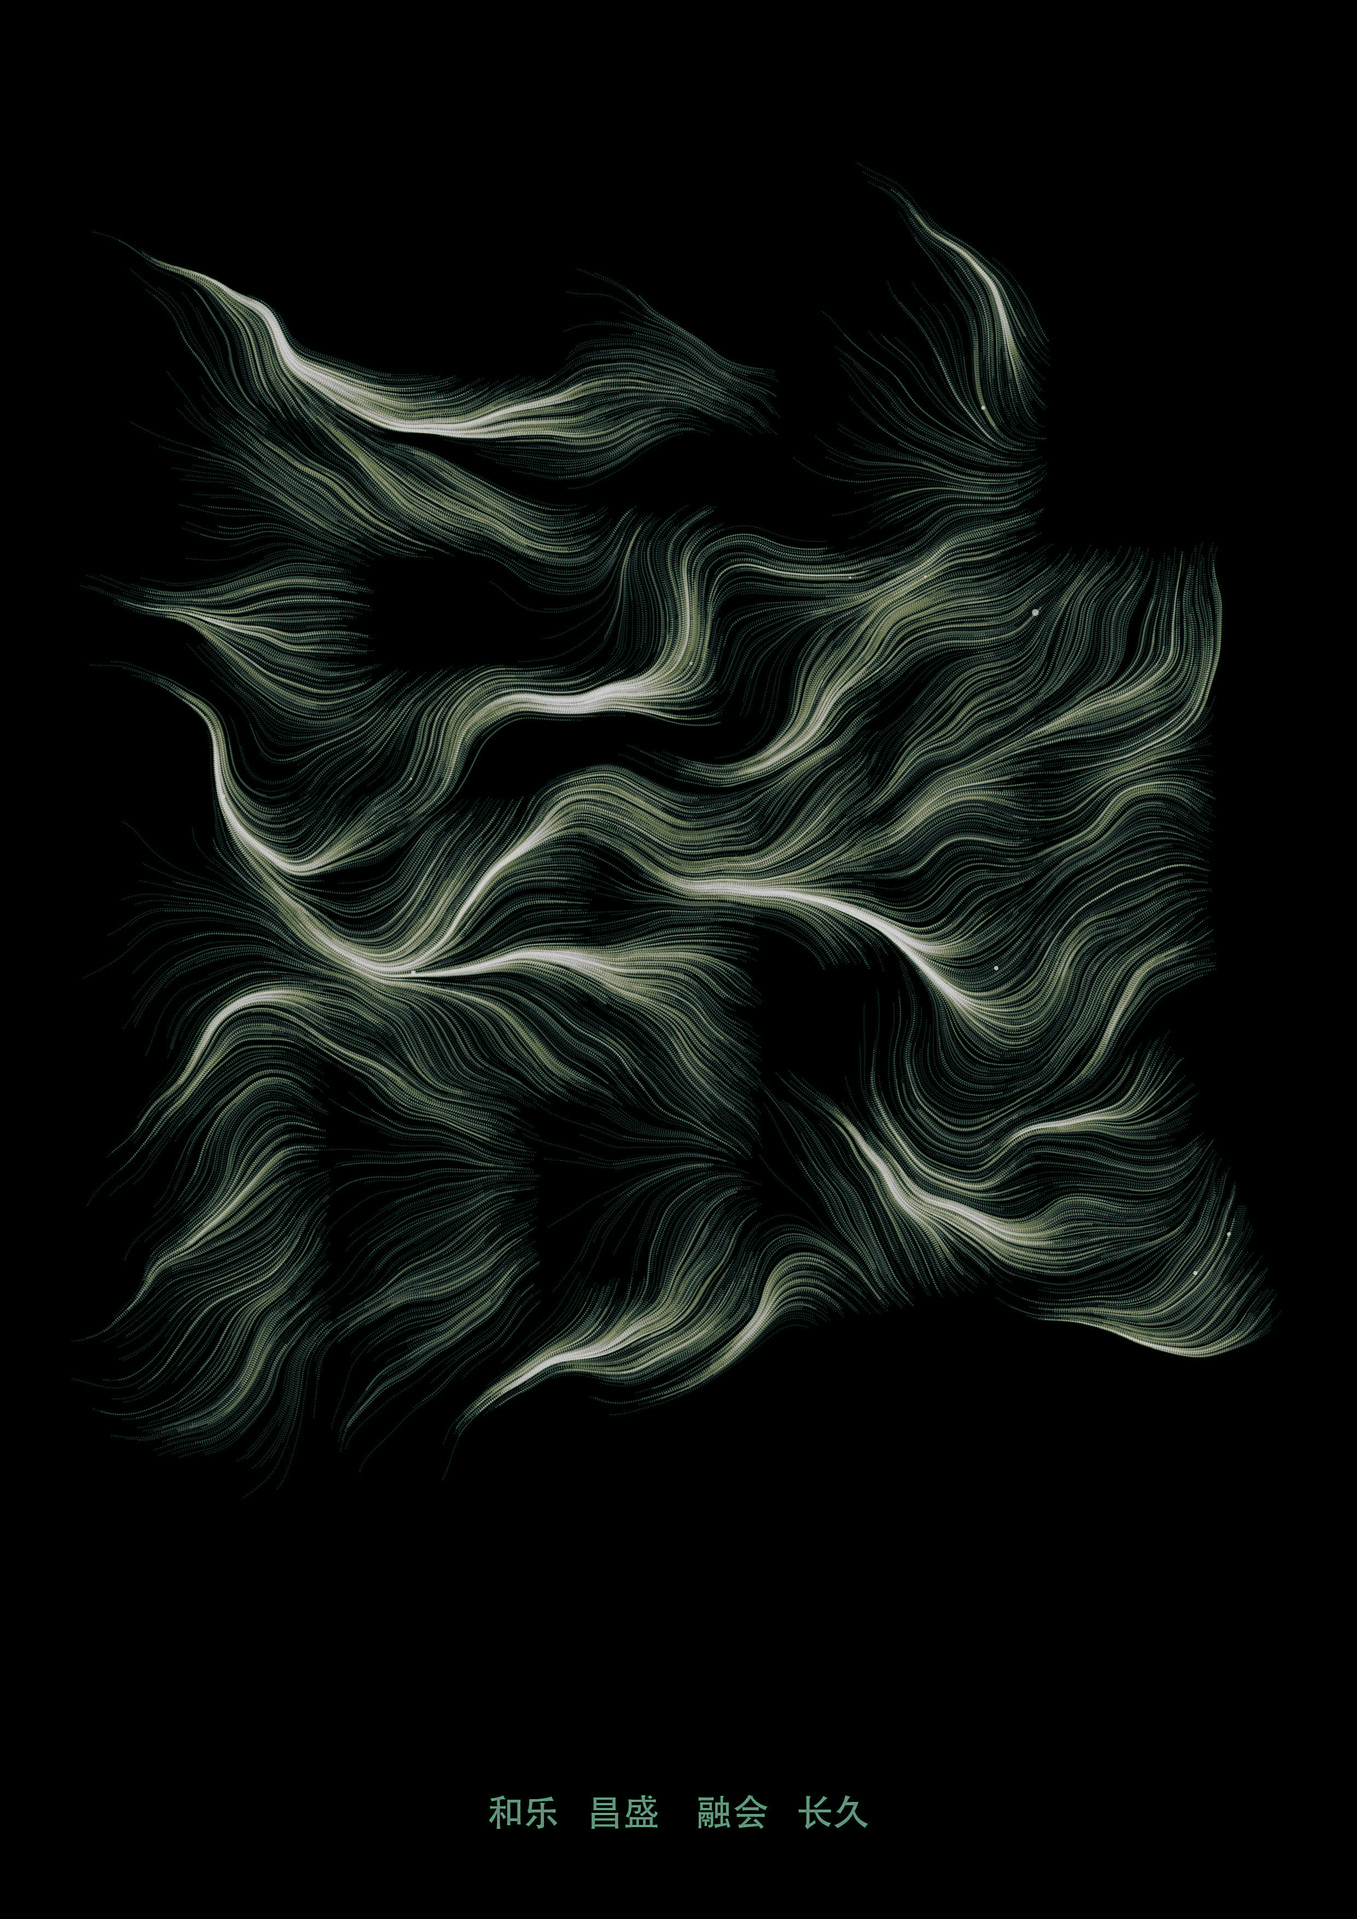 Tina Wang used computer processing to create this distorted form of typography that resembles wisps of smoke on a black background.